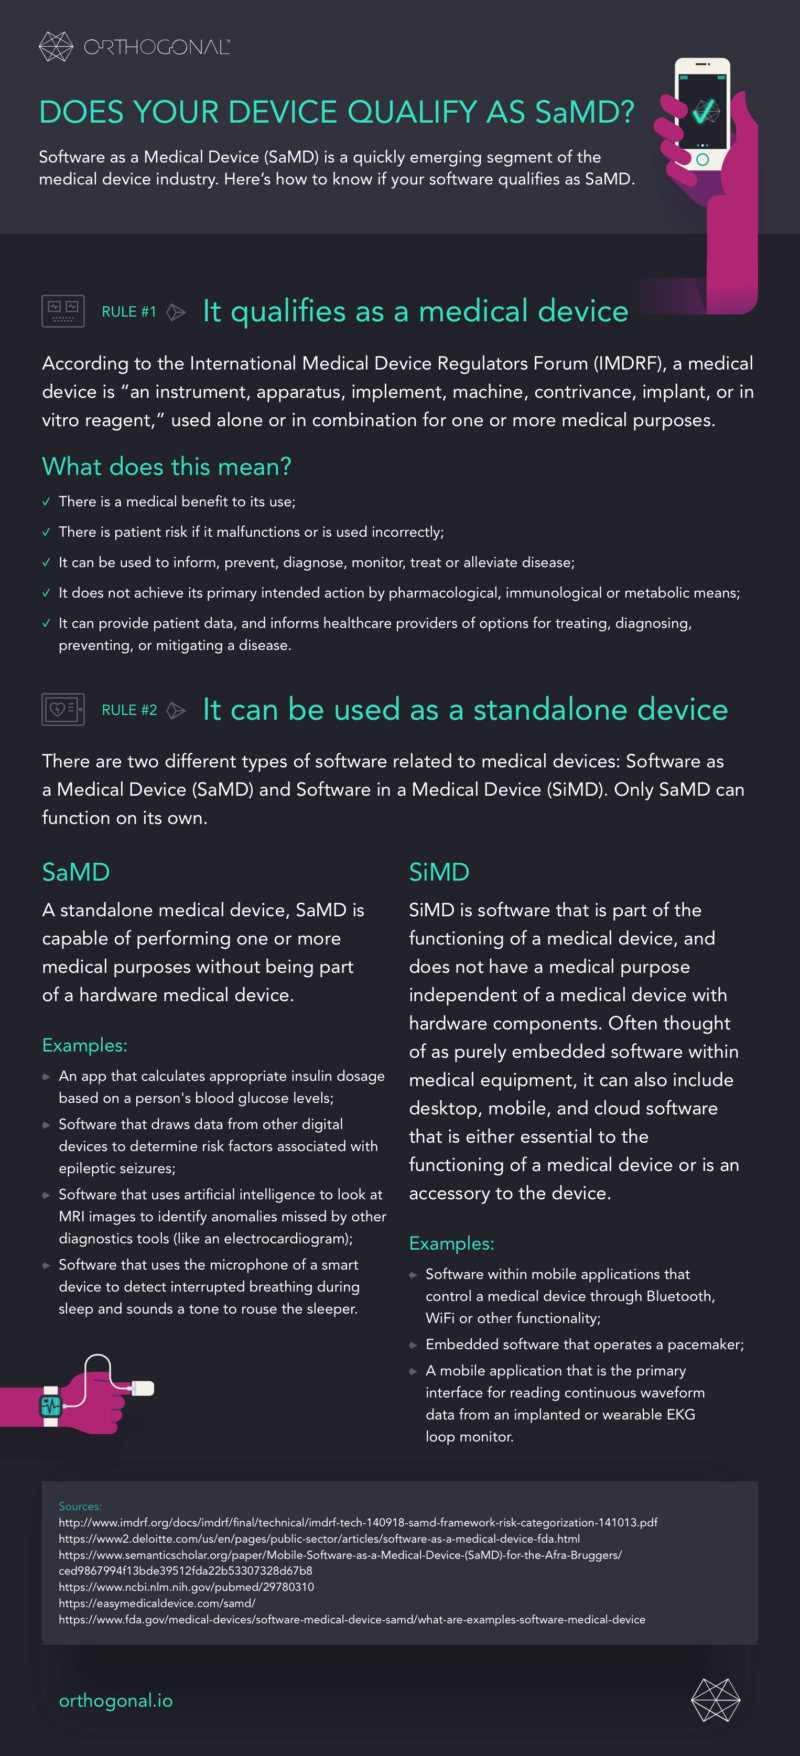 There are two different types of software related to medical devices: Software as a Medical Device (SaMD) and Software in a Medical Device (SiMD). Only SaMD can function on its own. This infographic shows the difference between SaMD and SiMD.